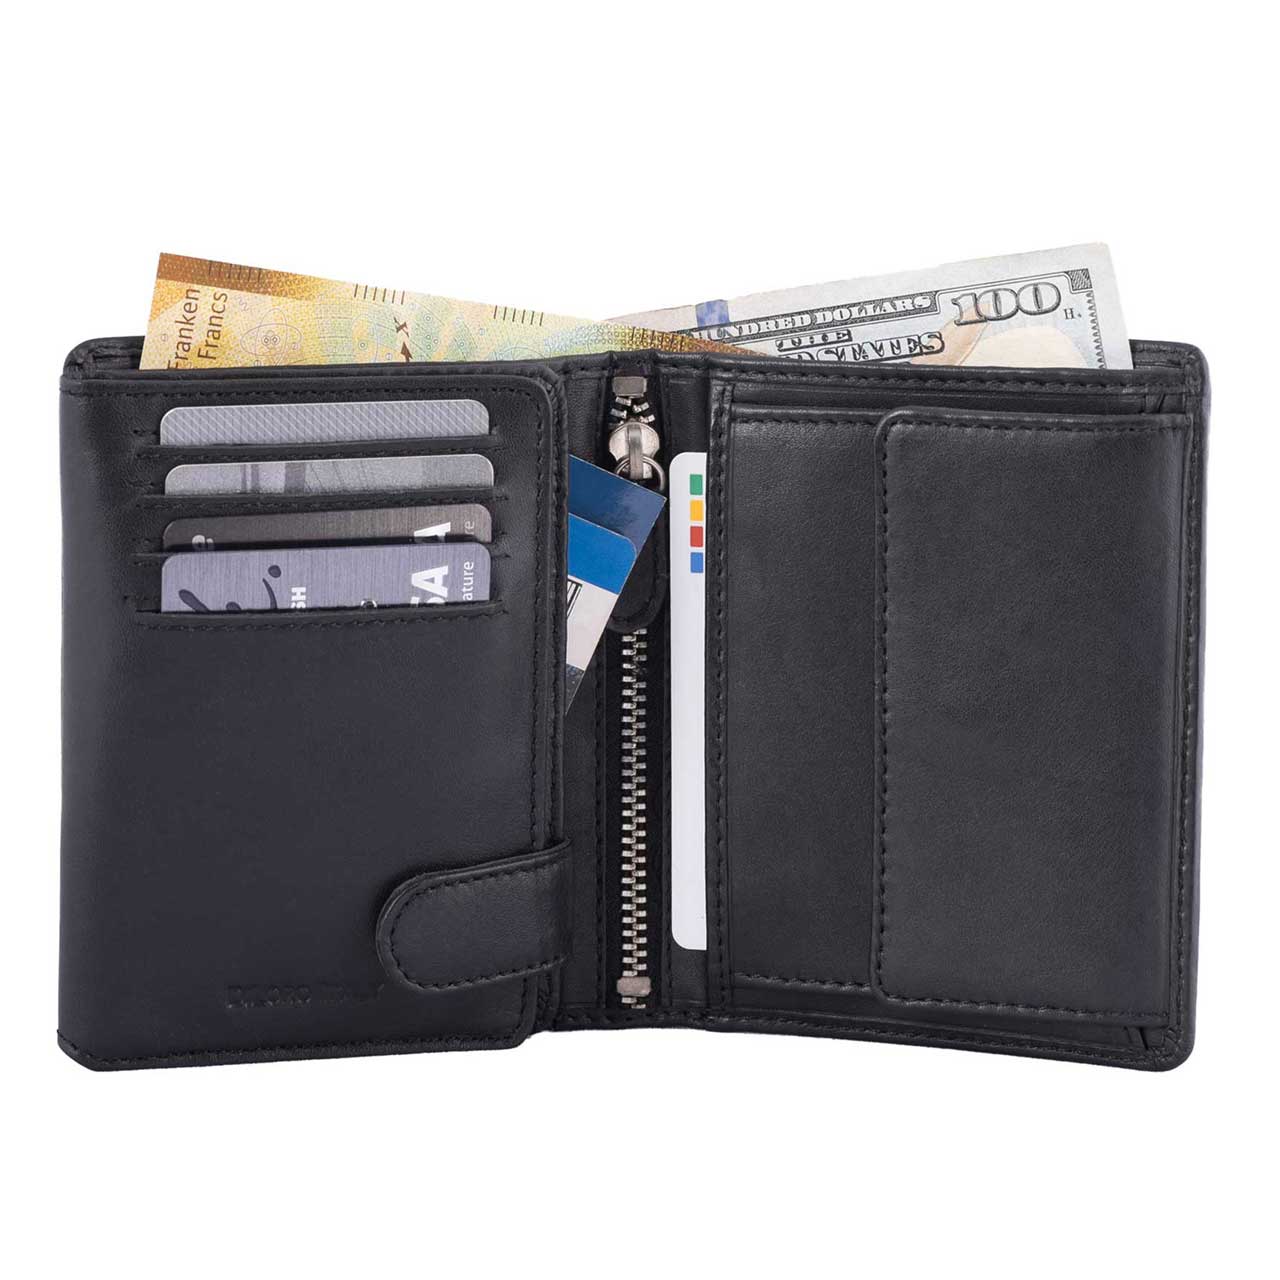 DiLoro Men's Compact Bifold Leather Wallet RFID Black